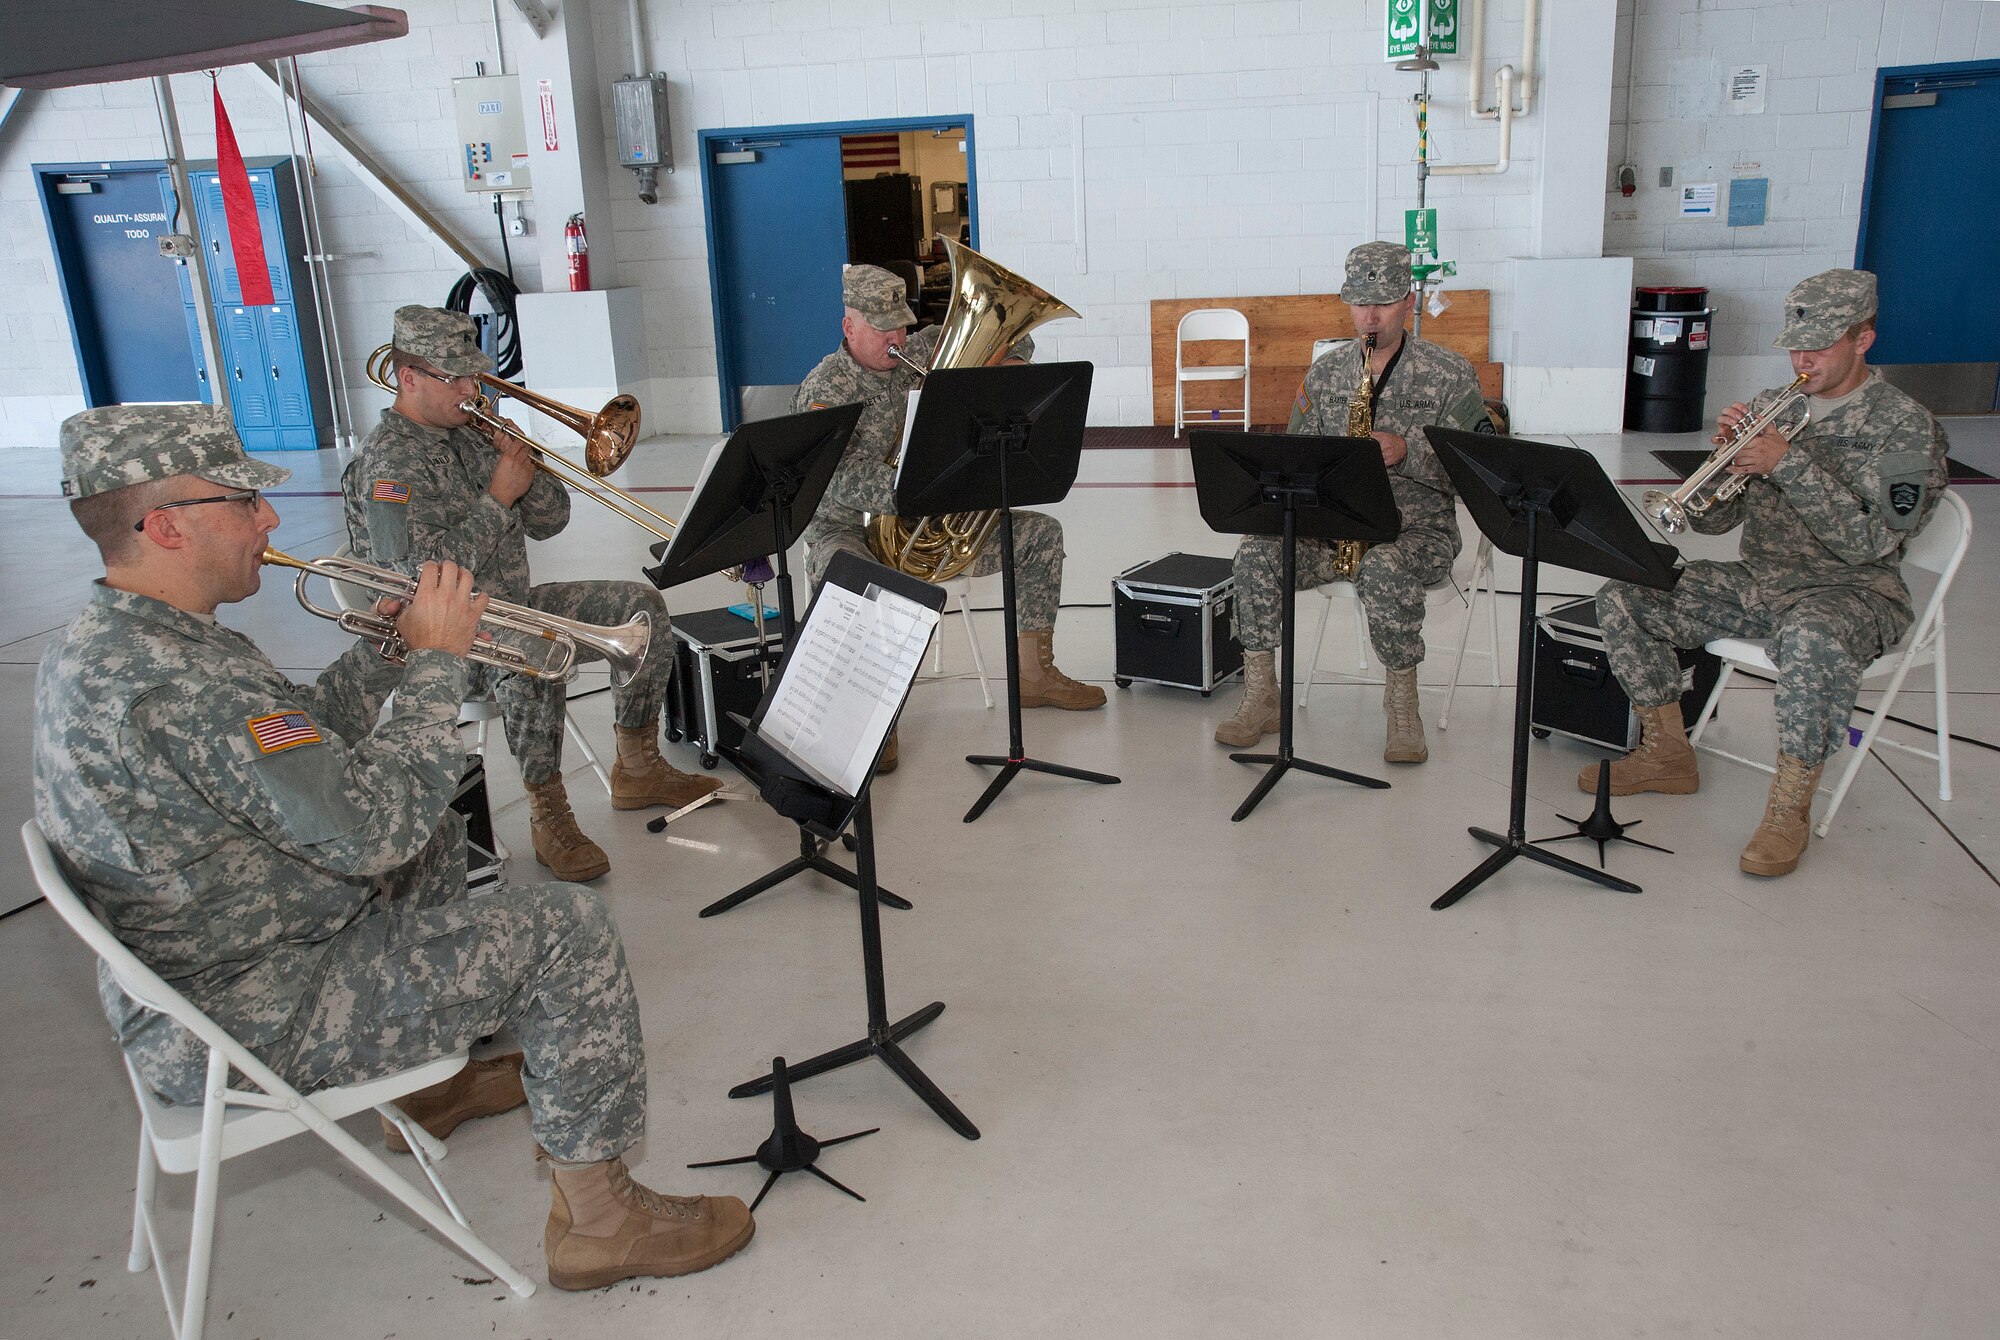 Members of the 234th Army National Guard Band perform during the 142nd Fighter Wing mobilization ceremony, June 26, 2015, Portland Air National Guard Base, Ore. (U.S. Air National Guard photo by Tech. Sgt. John Hughel, 142nd Fighter Wing Public Affairs/Released)